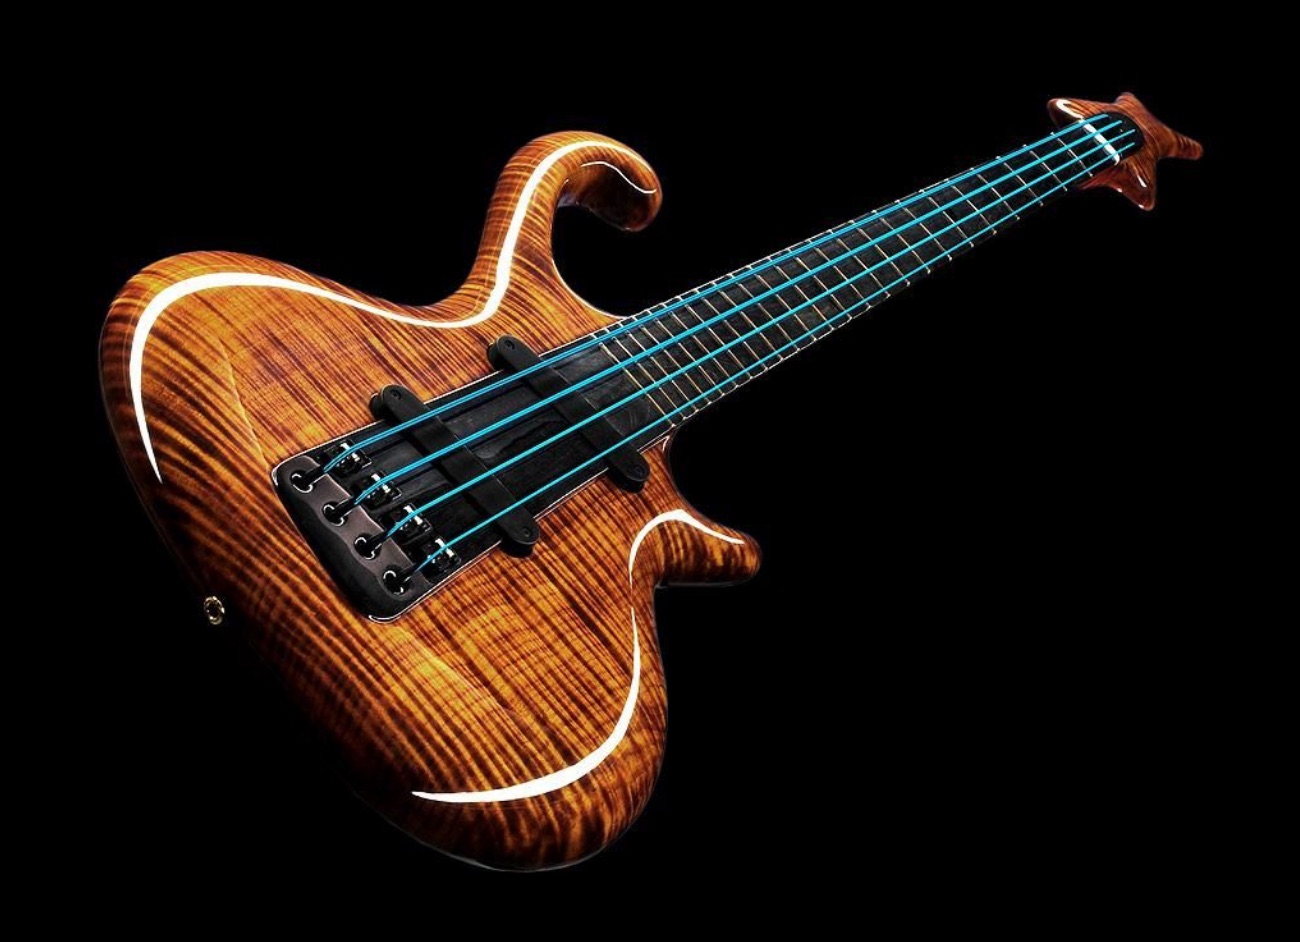 most expensive bass guitars in the world, jens ritter concept bass price